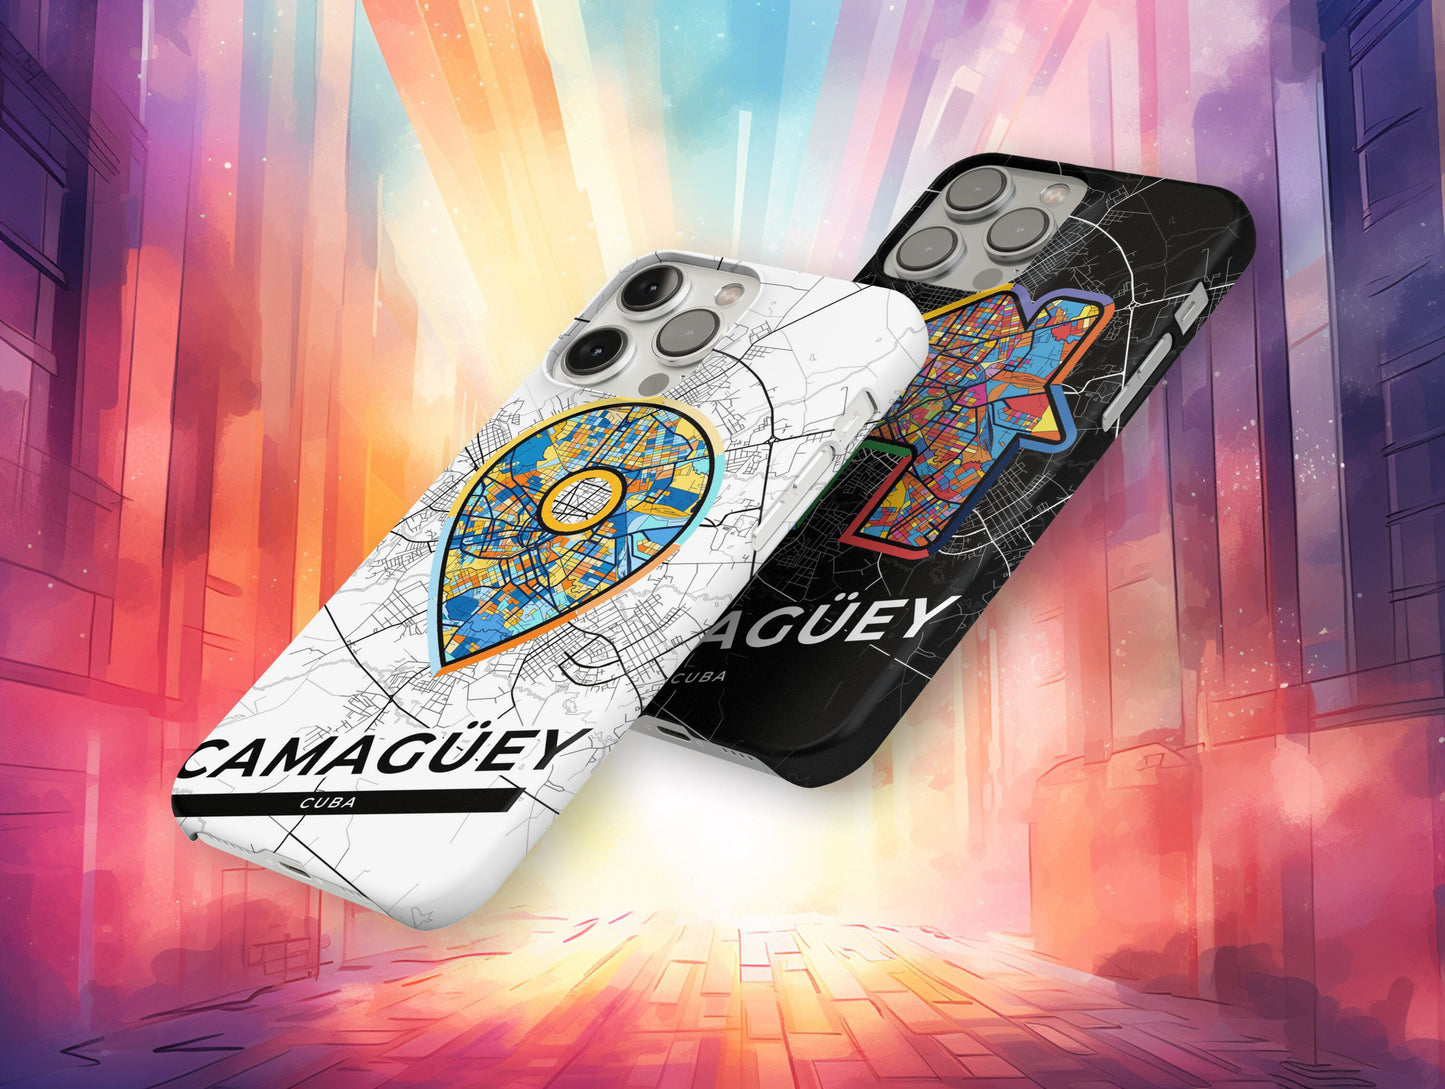 Camagüey Cuba slim phone case with colorful icon. Birthday, wedding or housewarming gift. Couple match cases.